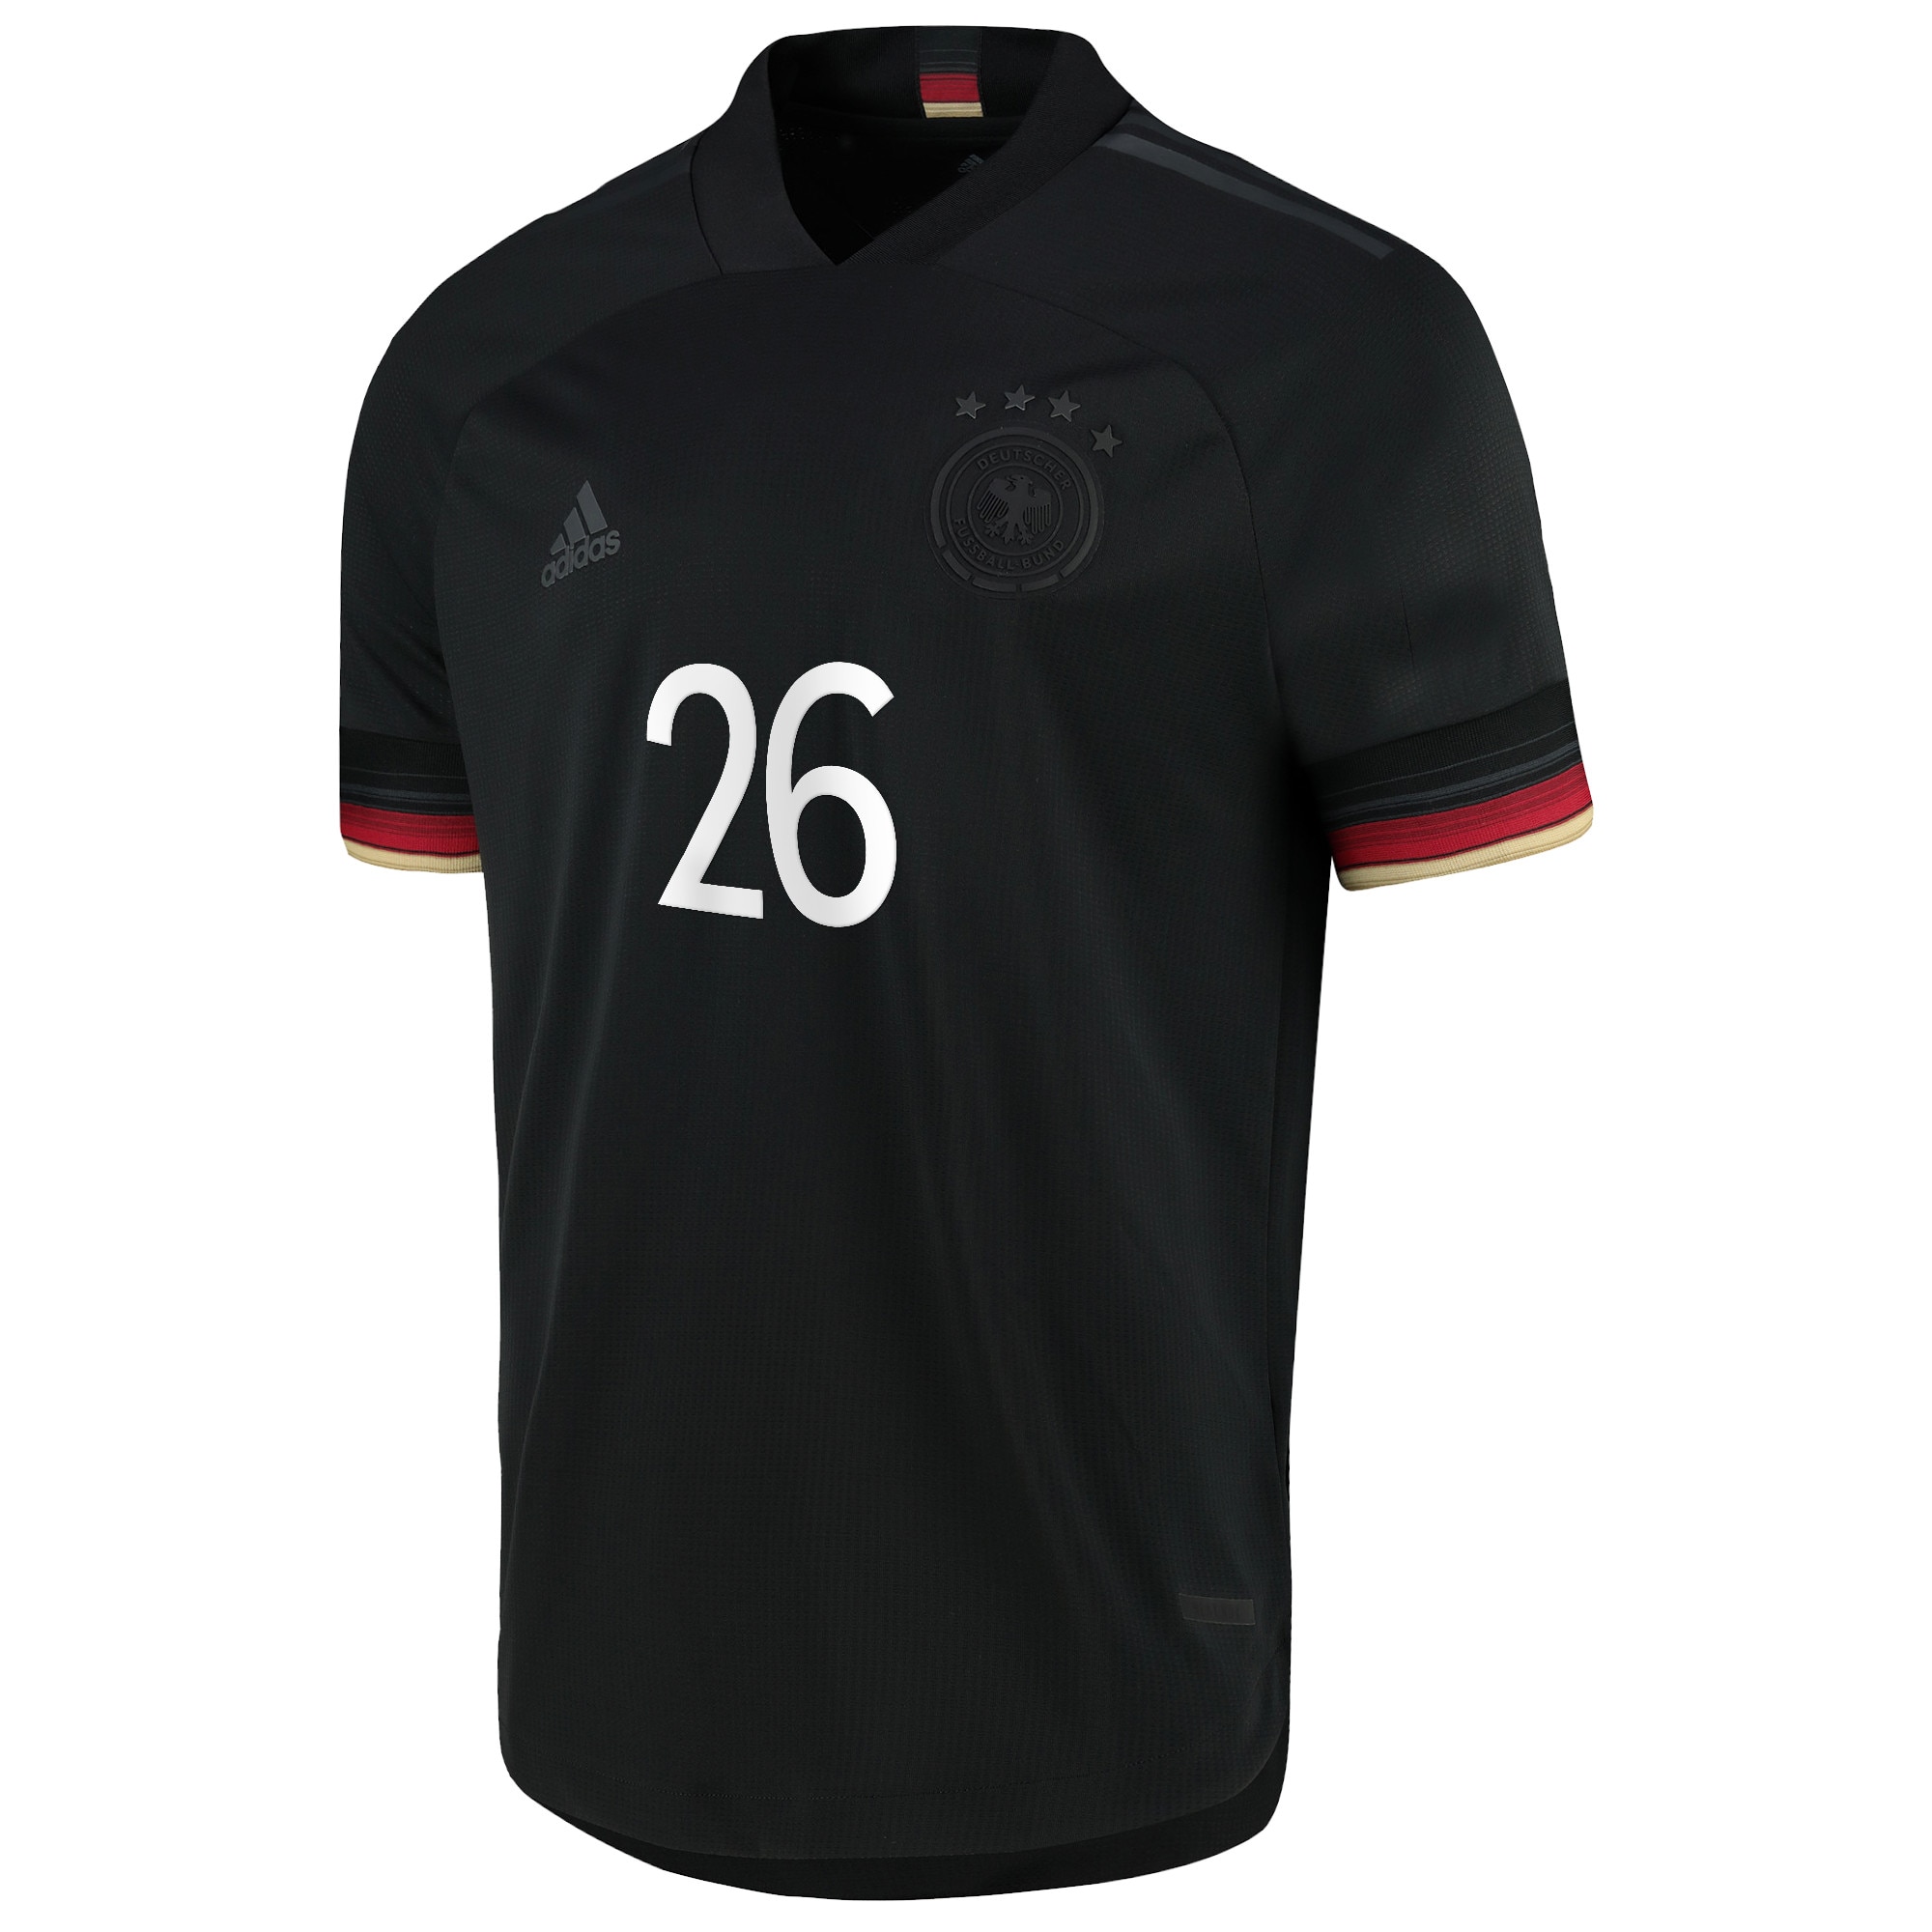 Germany Authentic Away Shirt 2021-22 with Gunter 26 printing